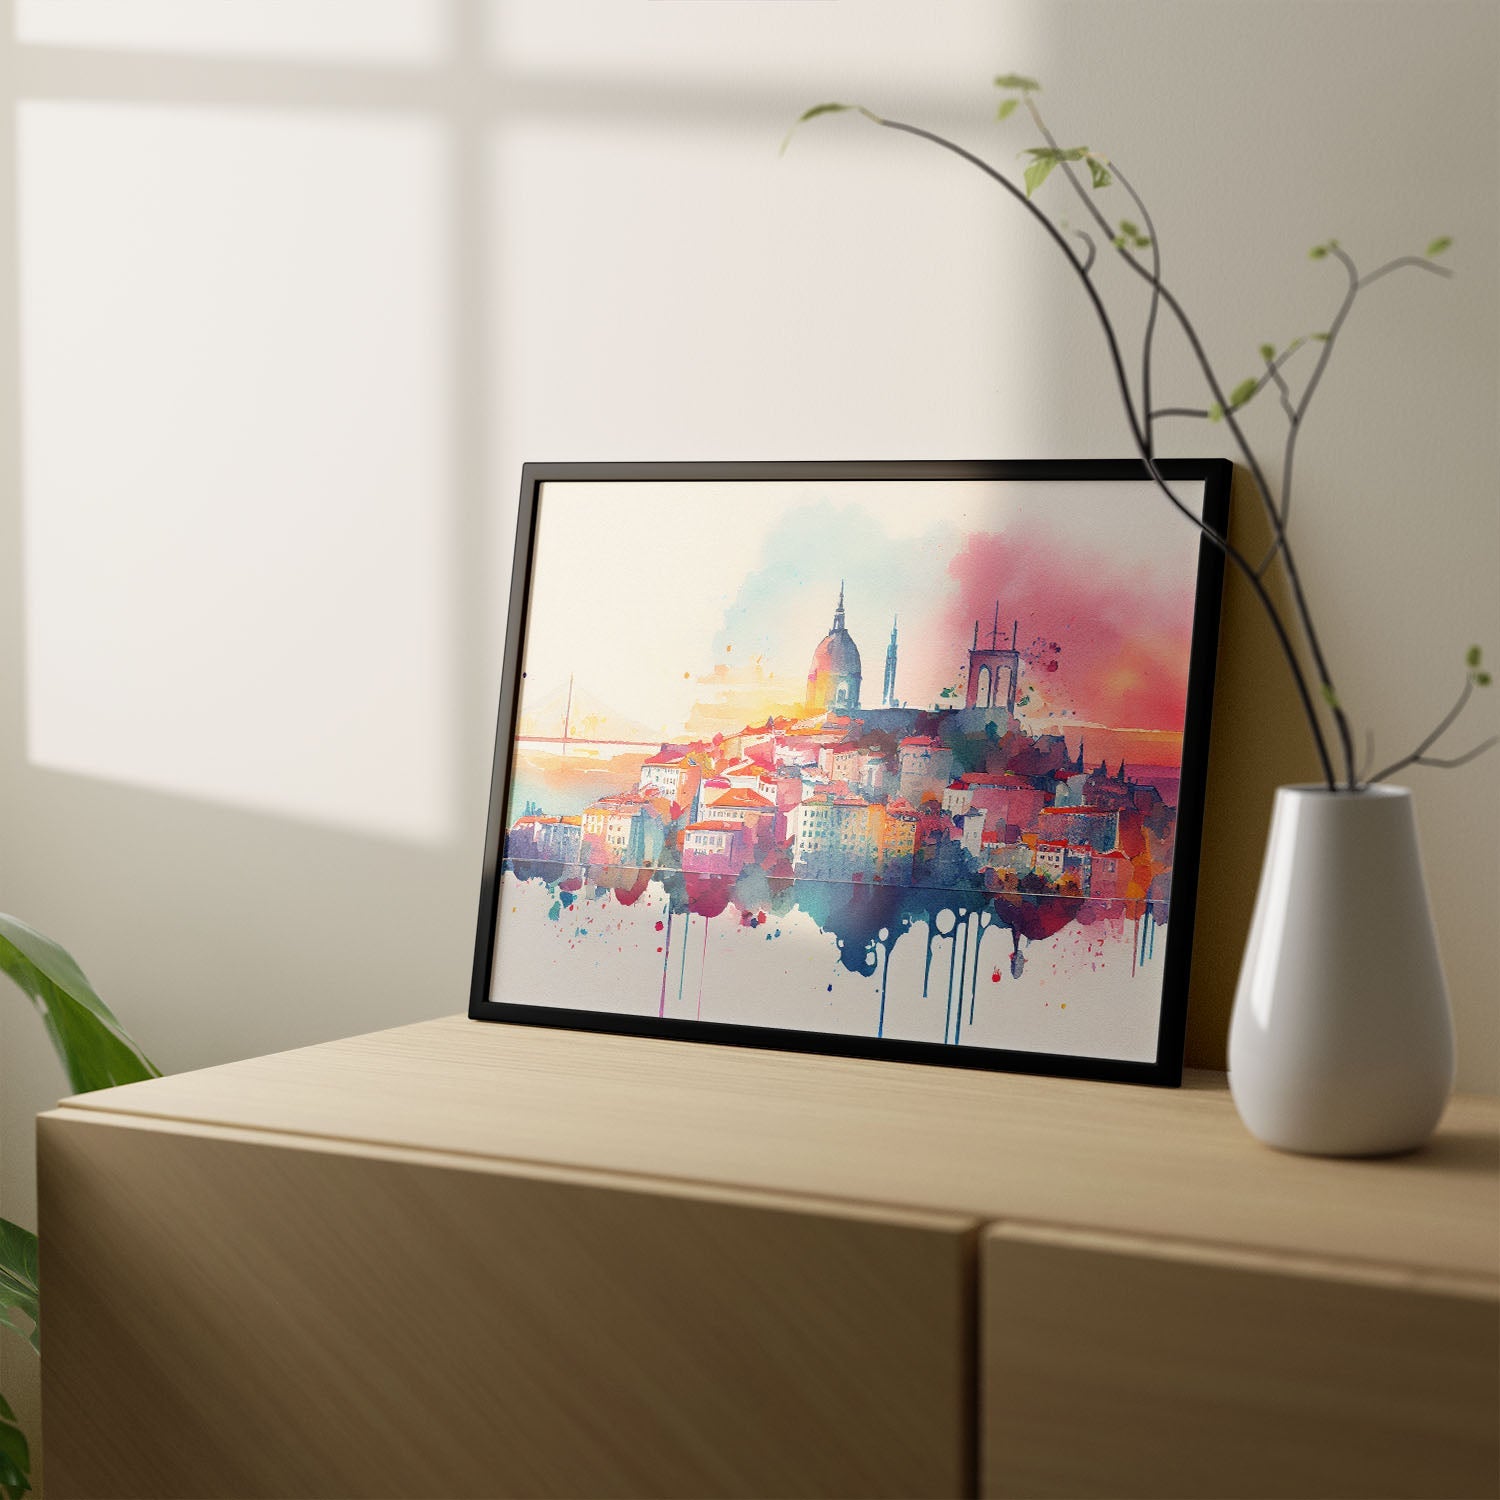 Nacnic watercolor of a skyline of the city of Lisbon_2. Aesthetic Wall Art Prints for Bedroom or Living Room Design.-Artwork-Nacnic-A4-Sin Marco-Nacnic Estudio SL